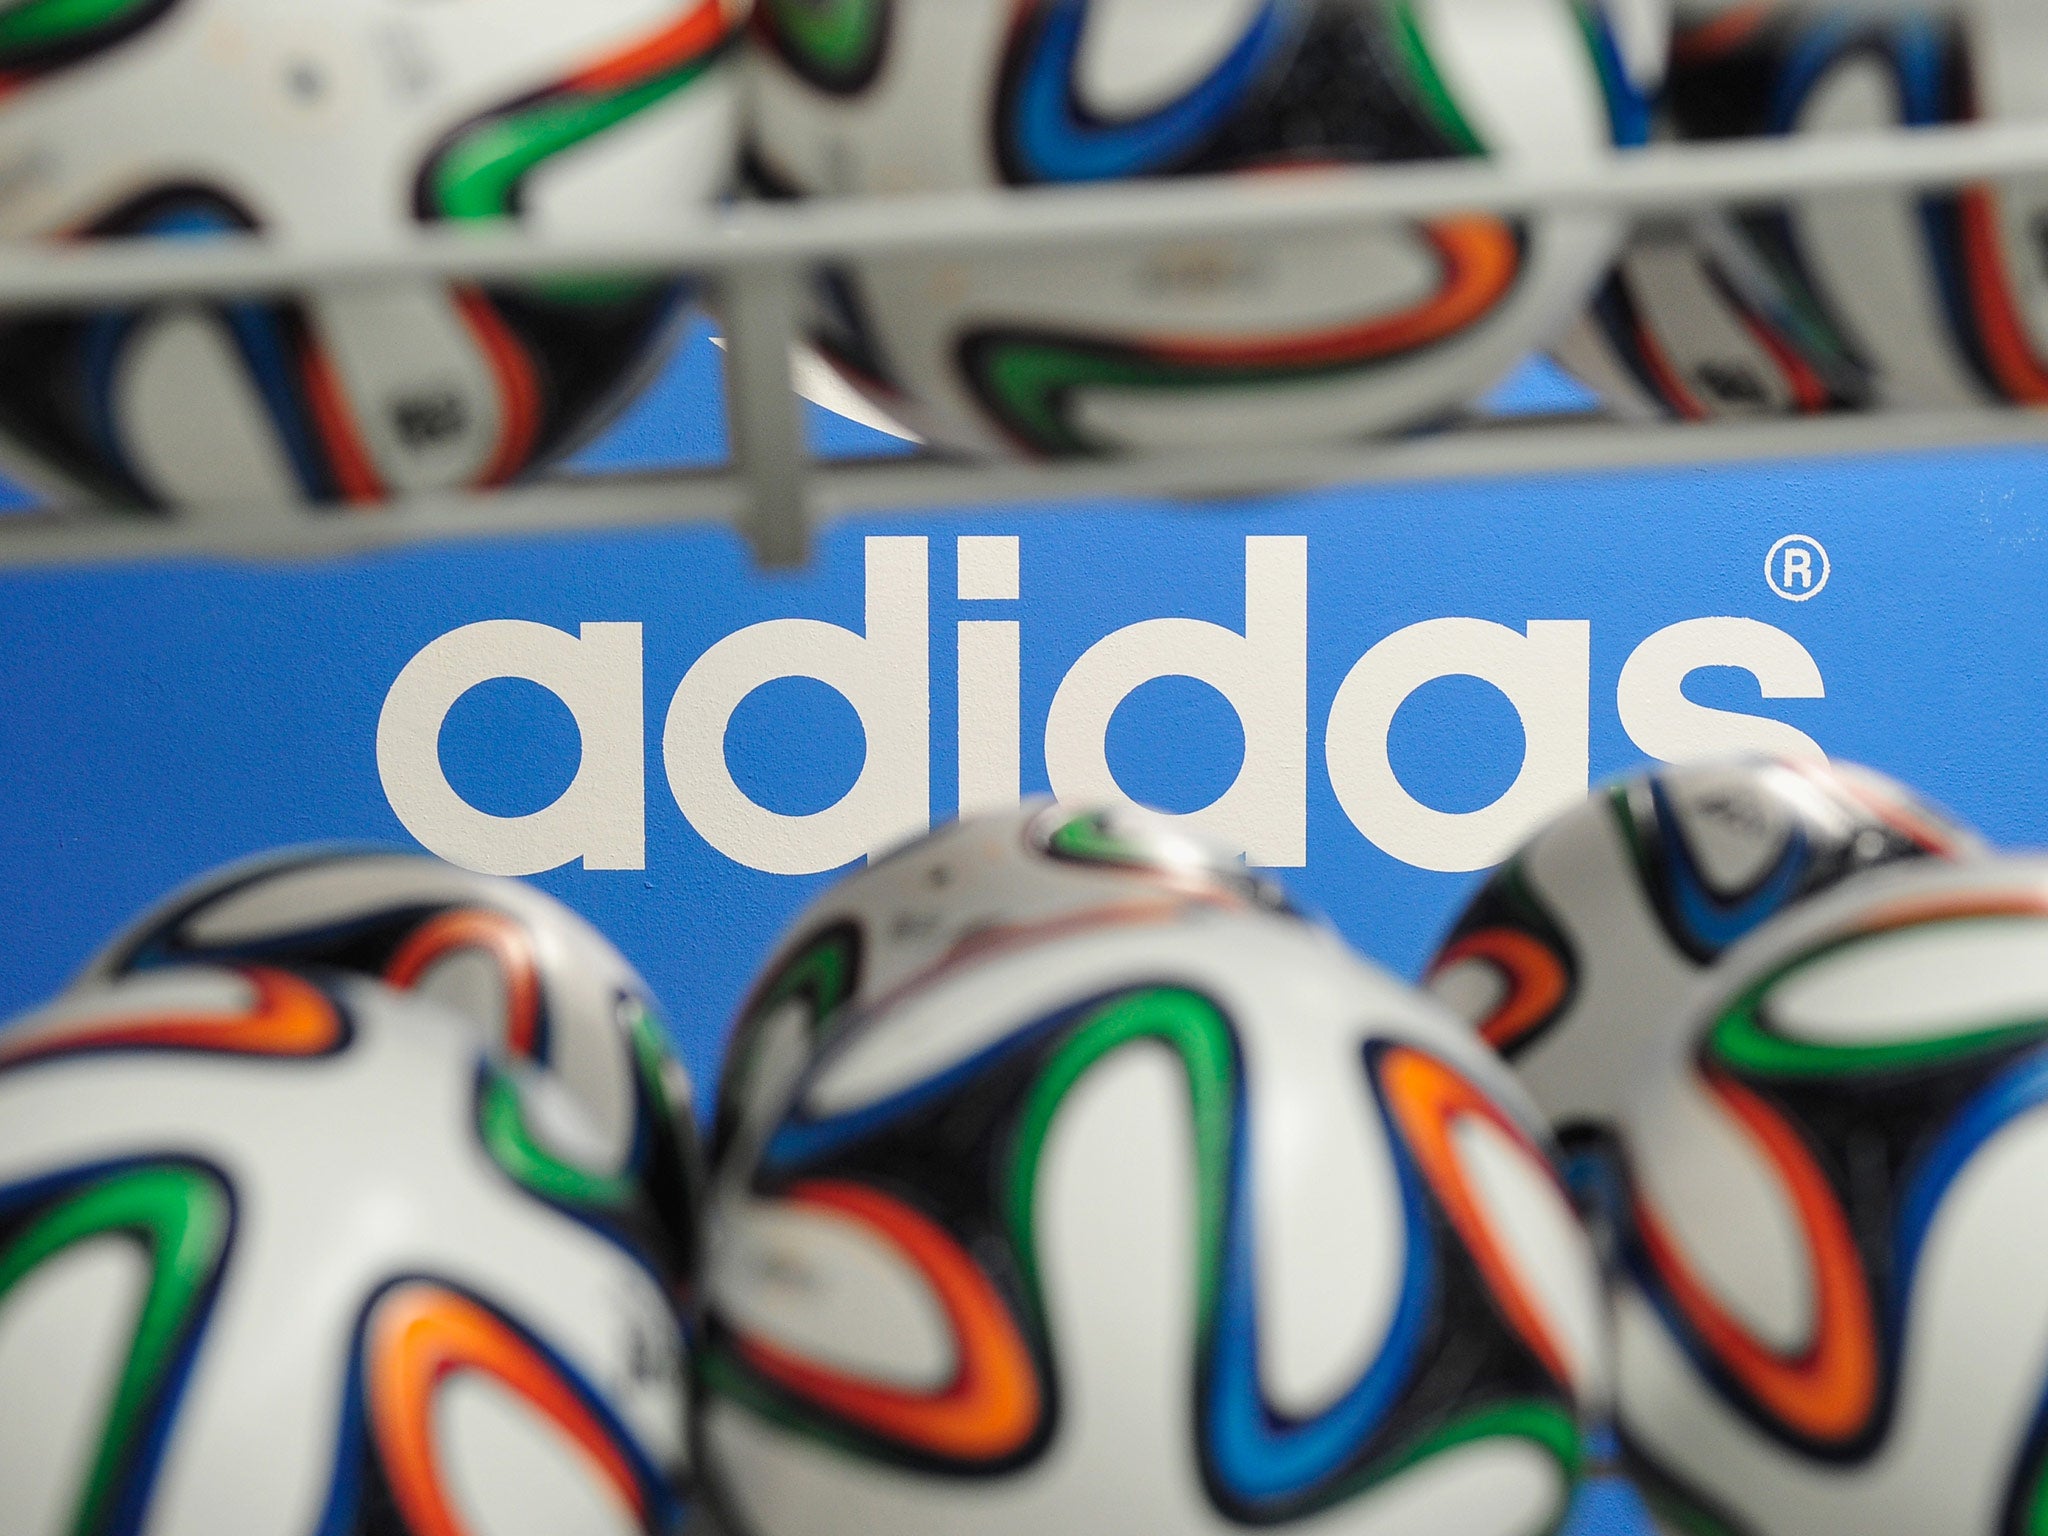 Brazuca match balls for the FIFA World Cup 2014 lie in a rack in front of the adidas logo